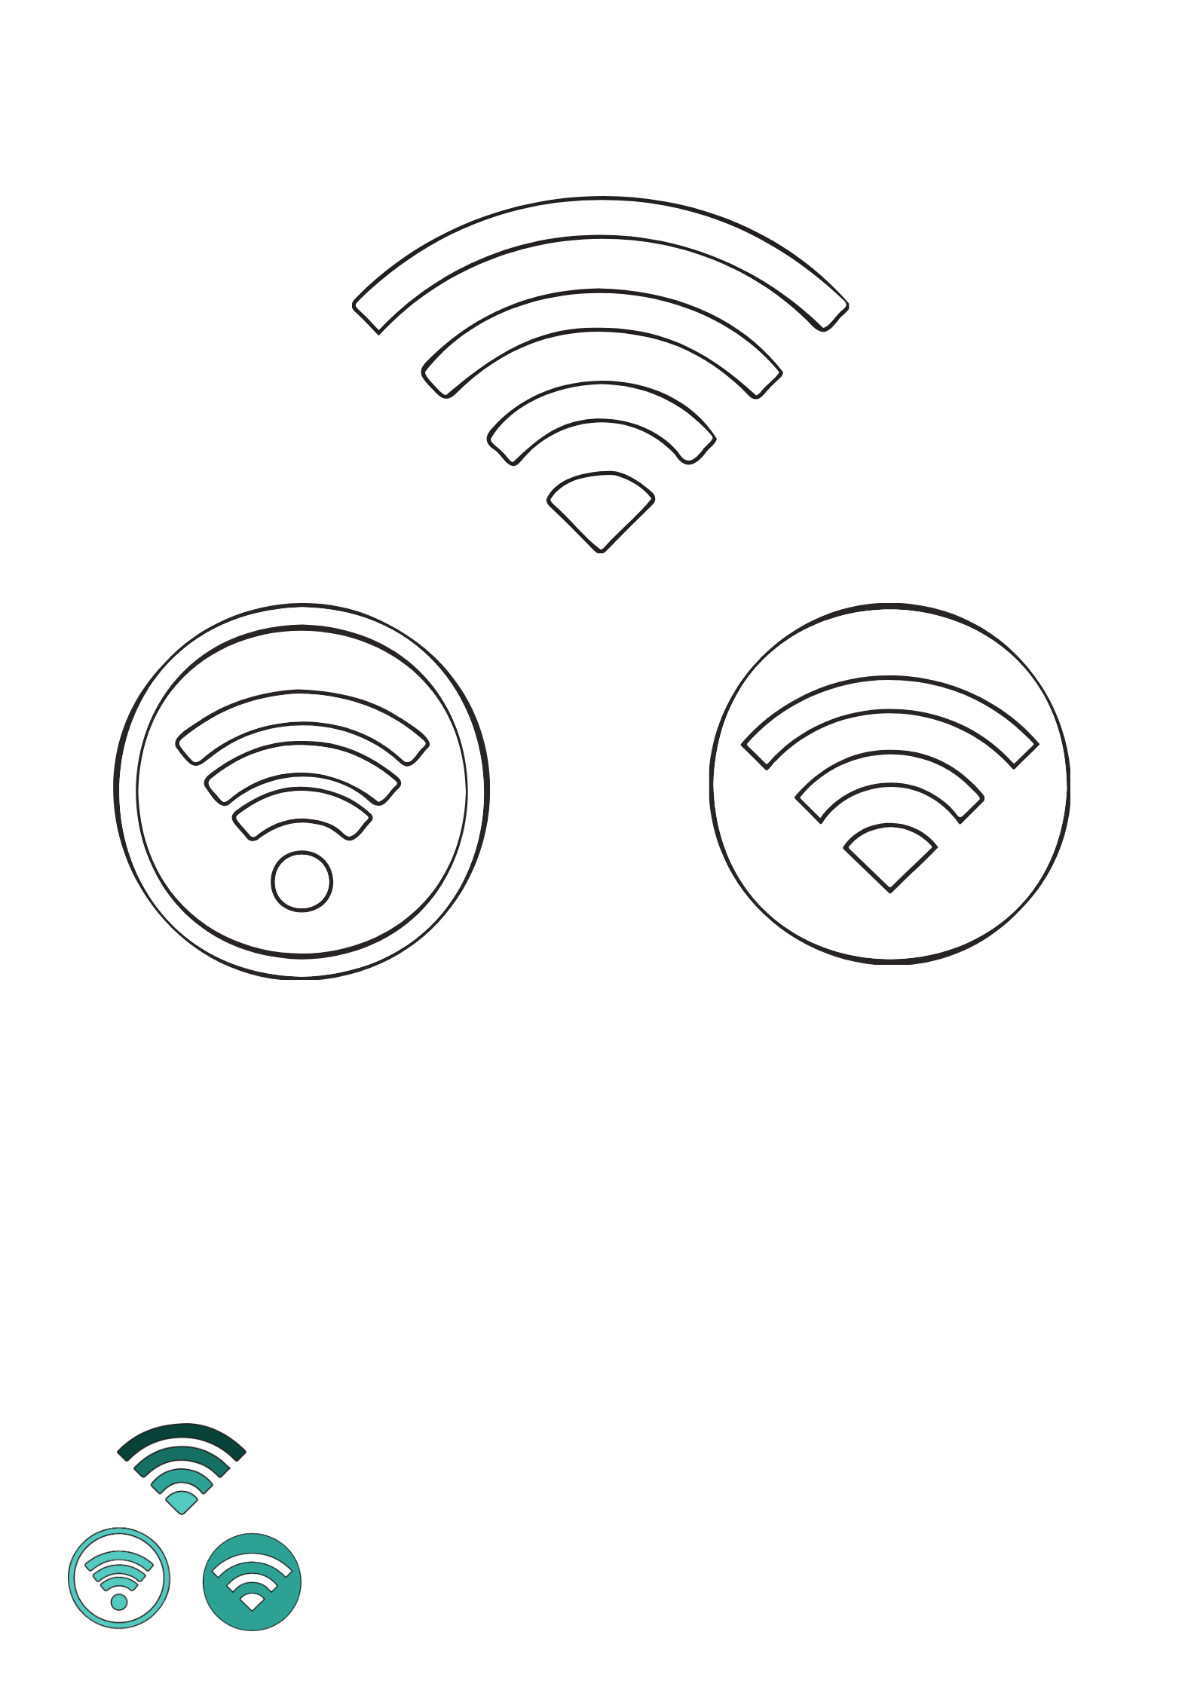 Free Wifi Shape coloring page Template